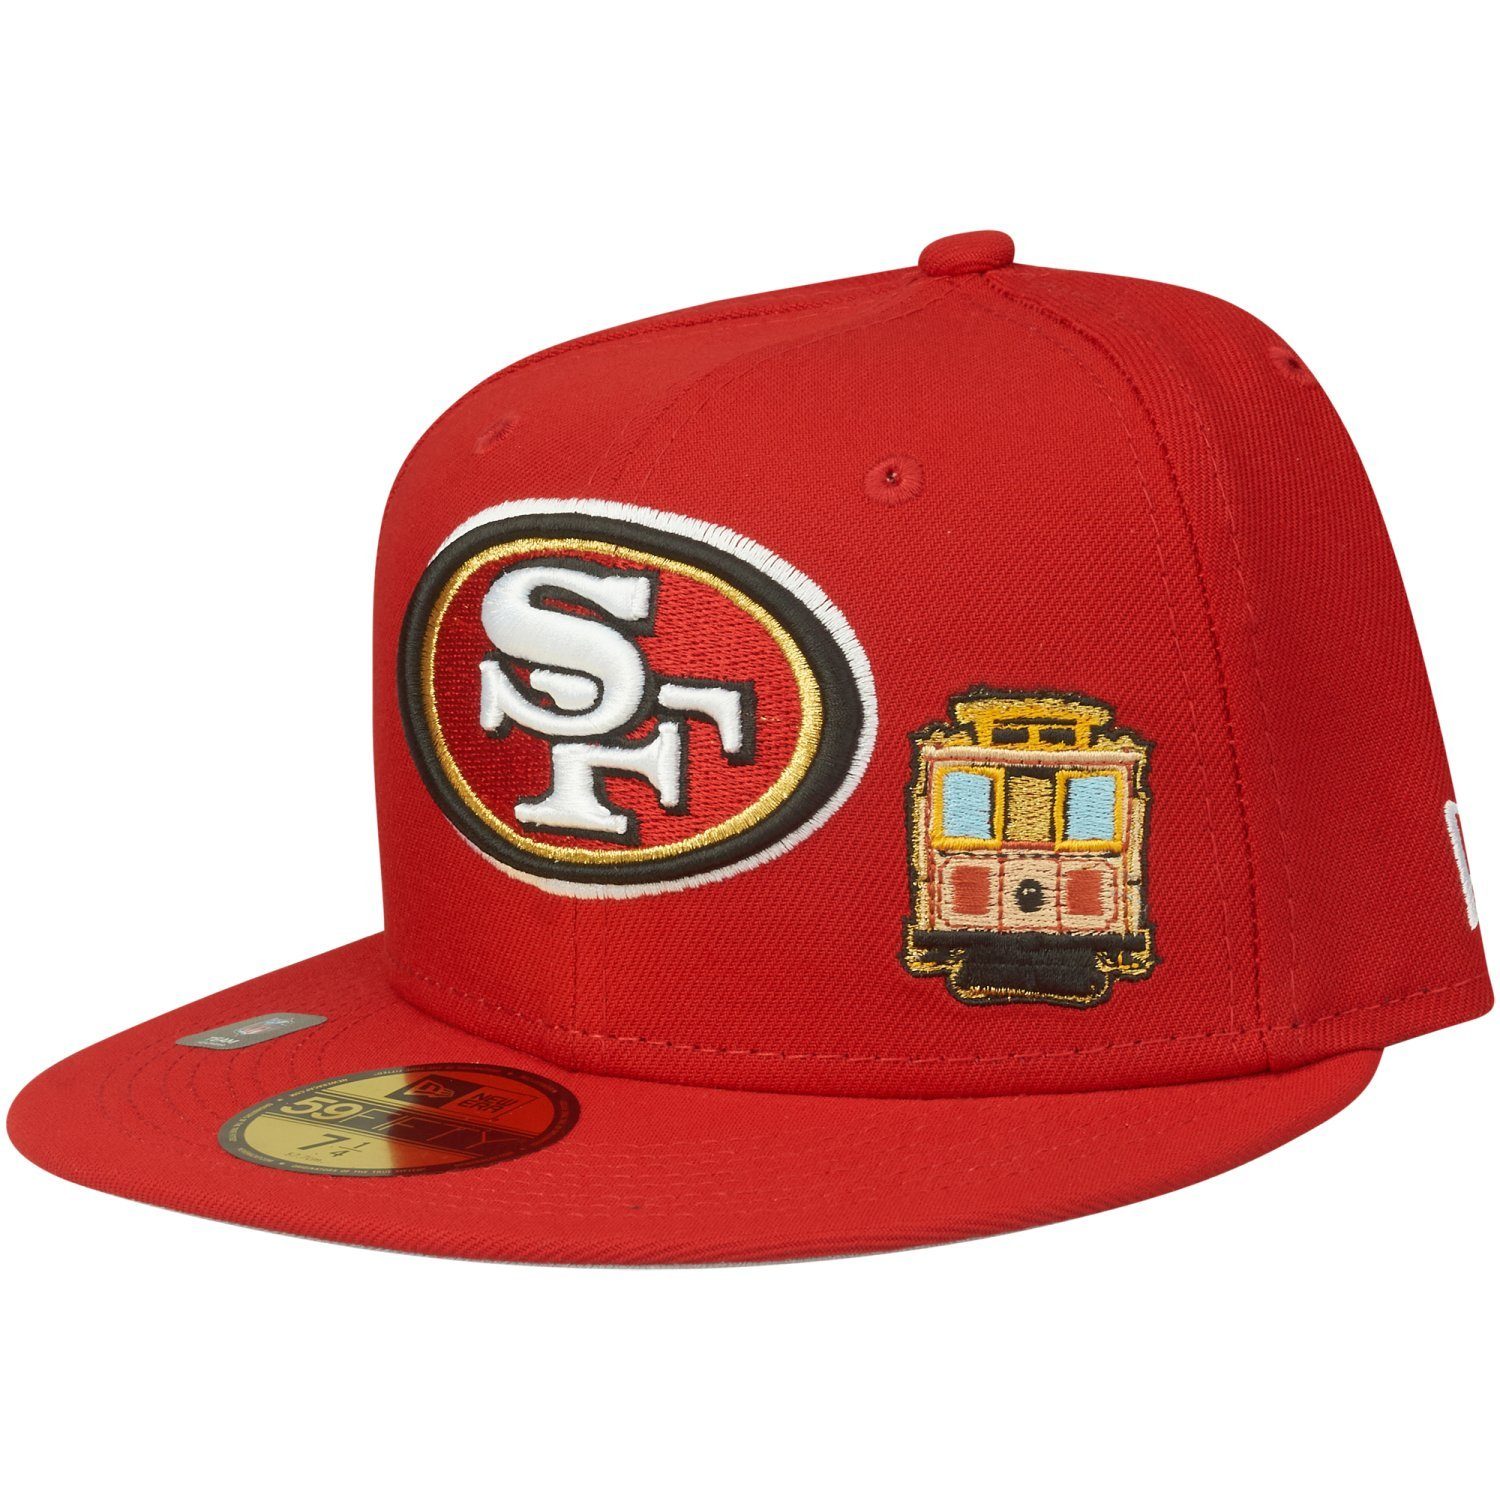 New Era Fitted Cap 59Fifty NFL CITY San Francisco 49ers